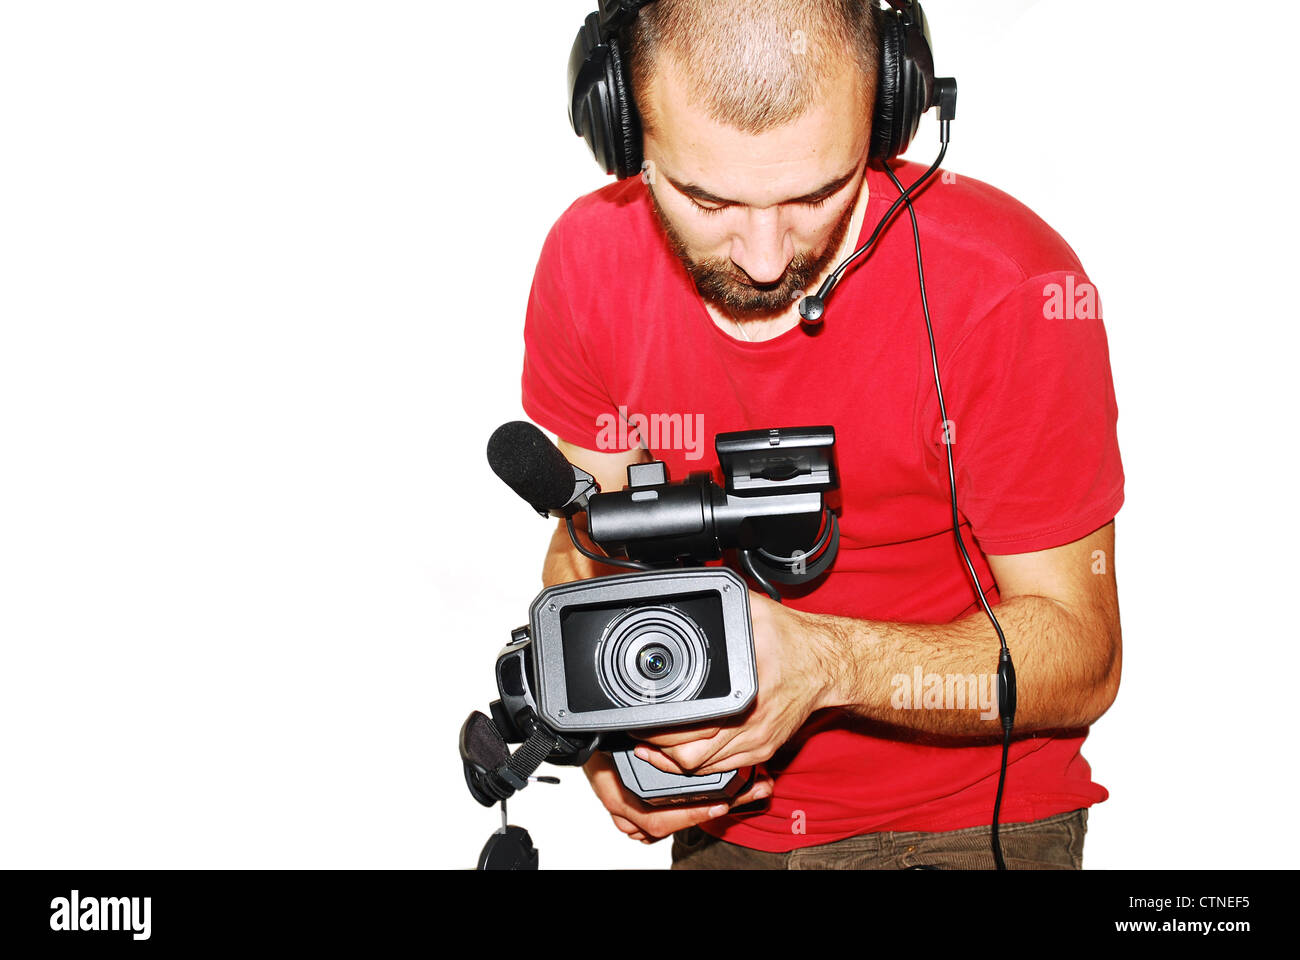 image with a television cameraman working with camera Stock Photo